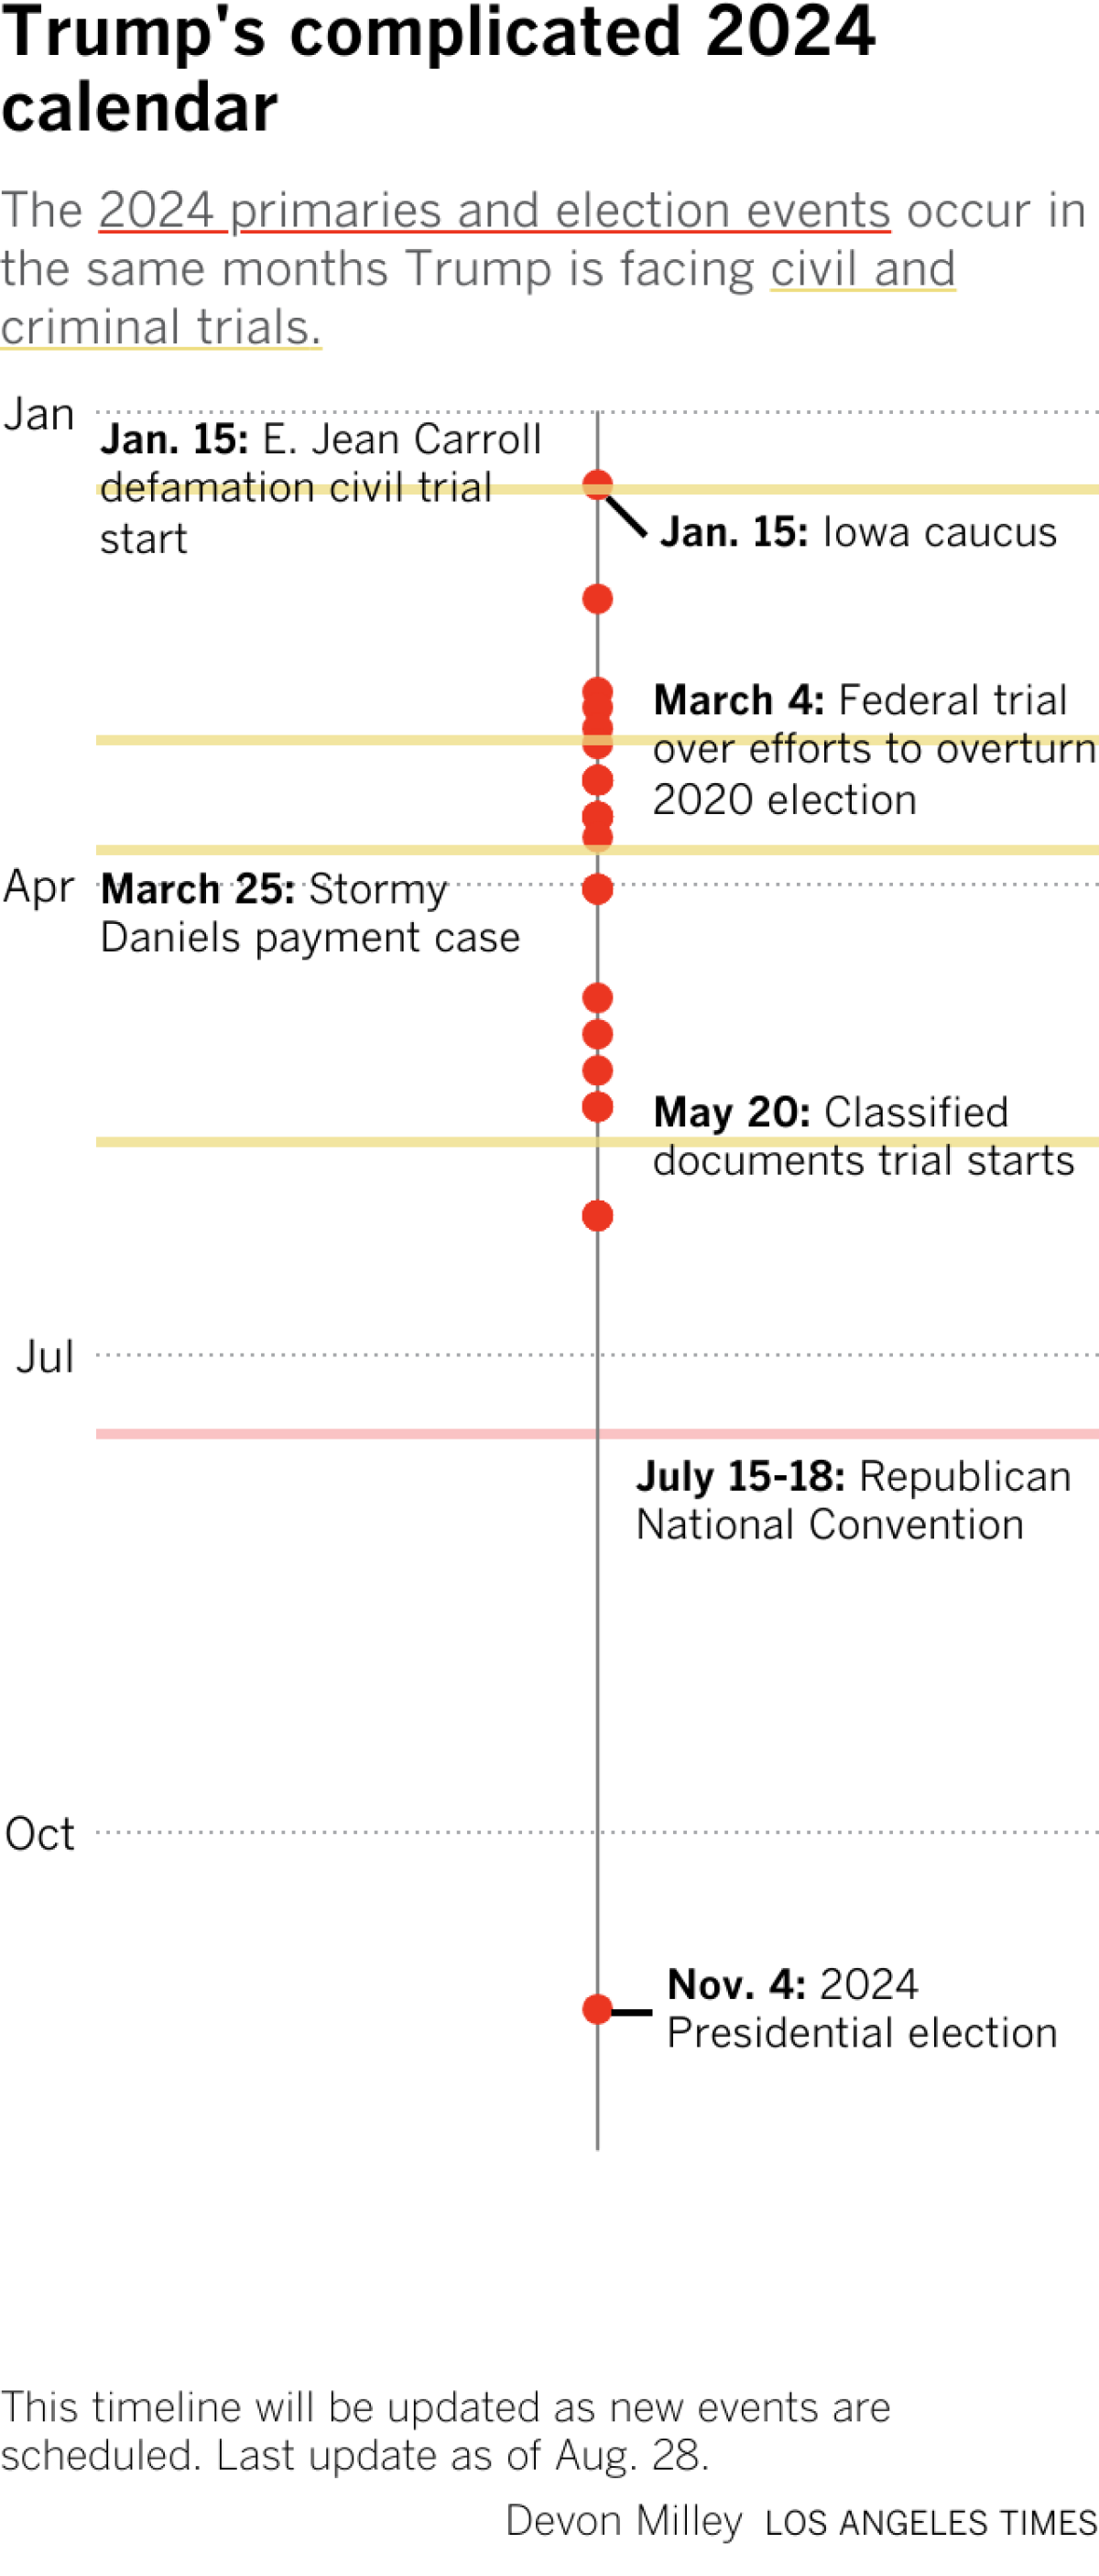 A timeline of 2024 Republican presidential campaign dates and Donald Trump's court dates